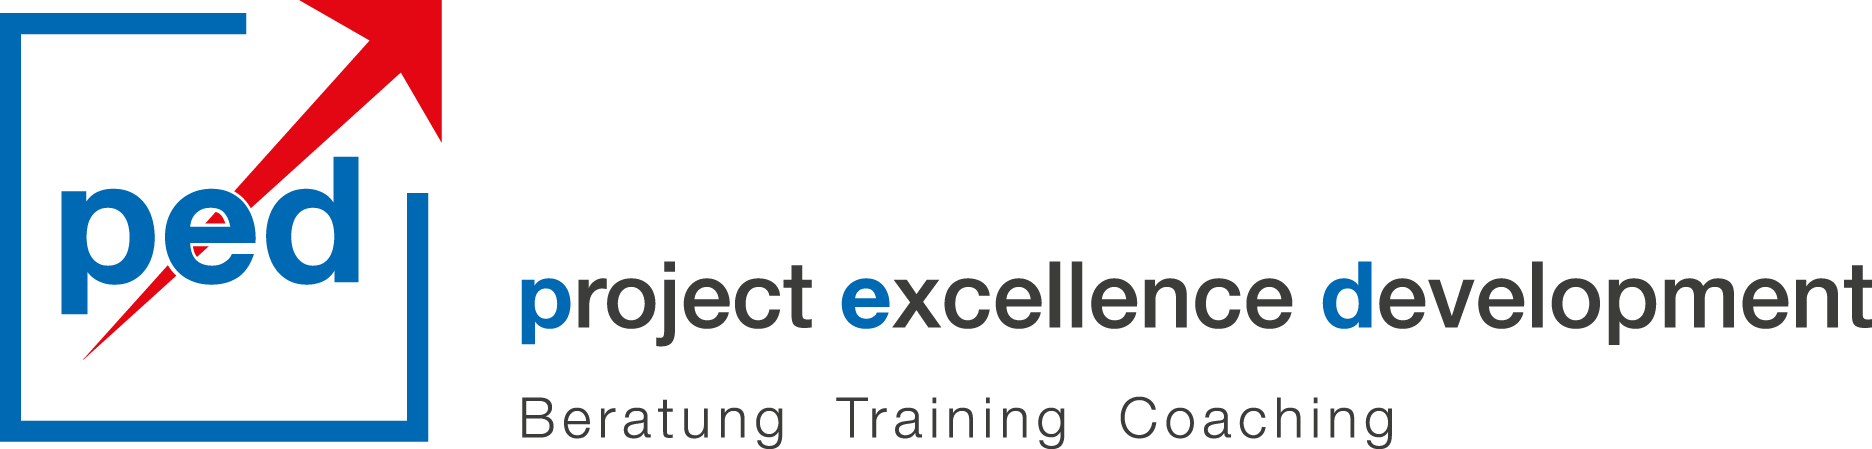 project excellence development